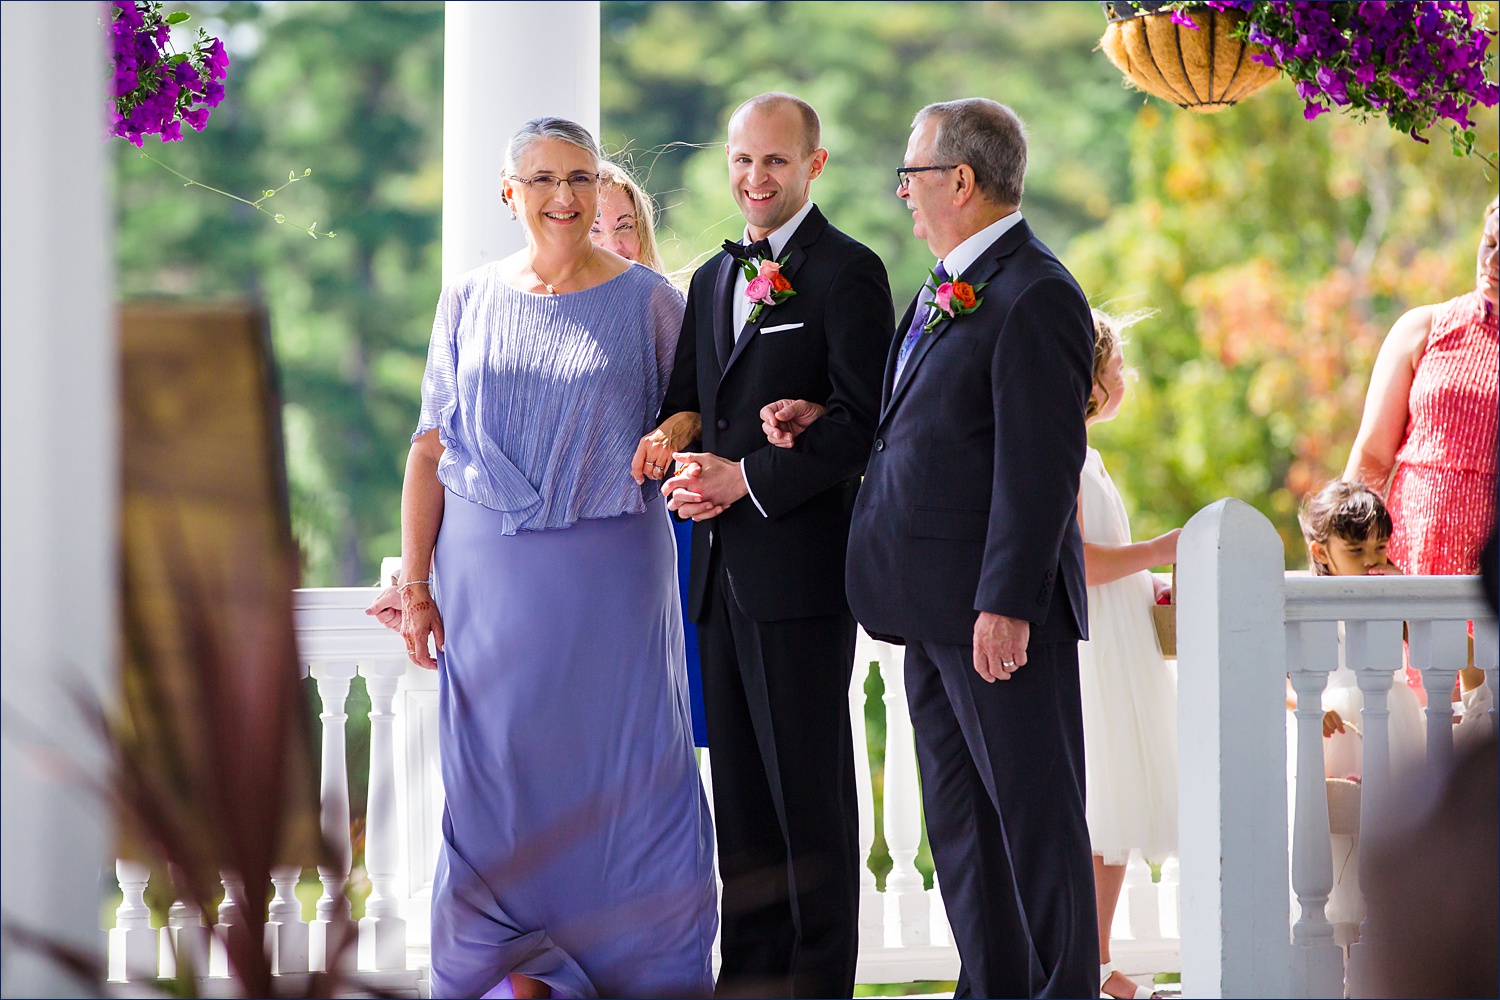 The groom stands with his parents as the start to walk him into the wedding ceremony on the veranda